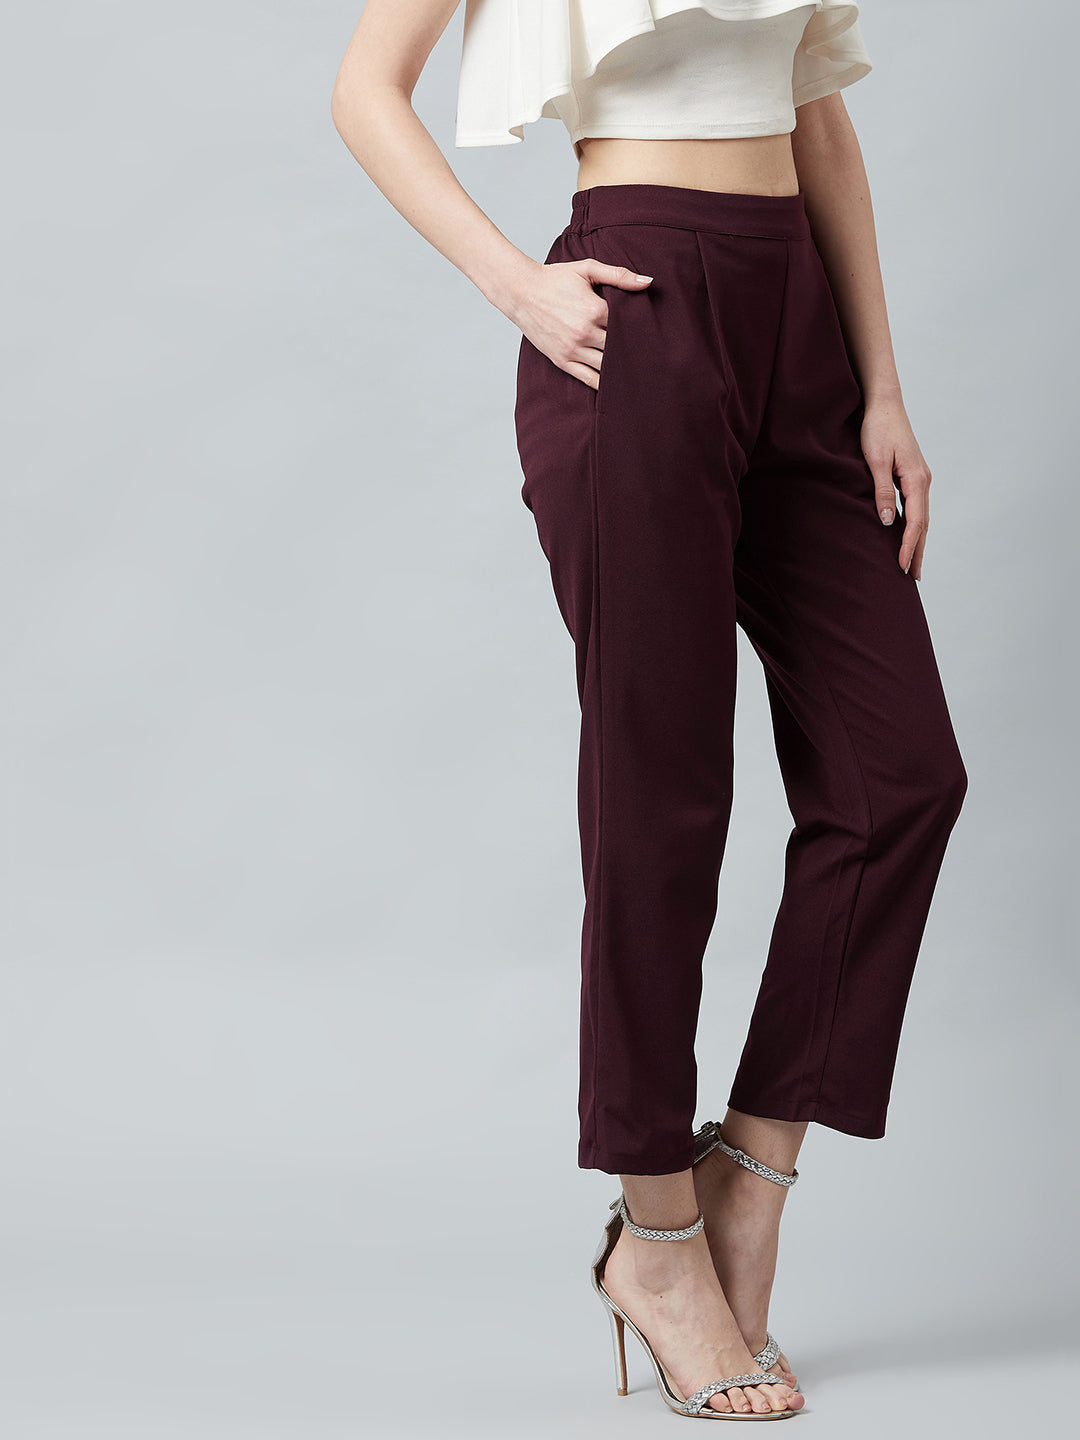 Burgundy Bliss Women Cotton Pants casual and semi formal daily trousers